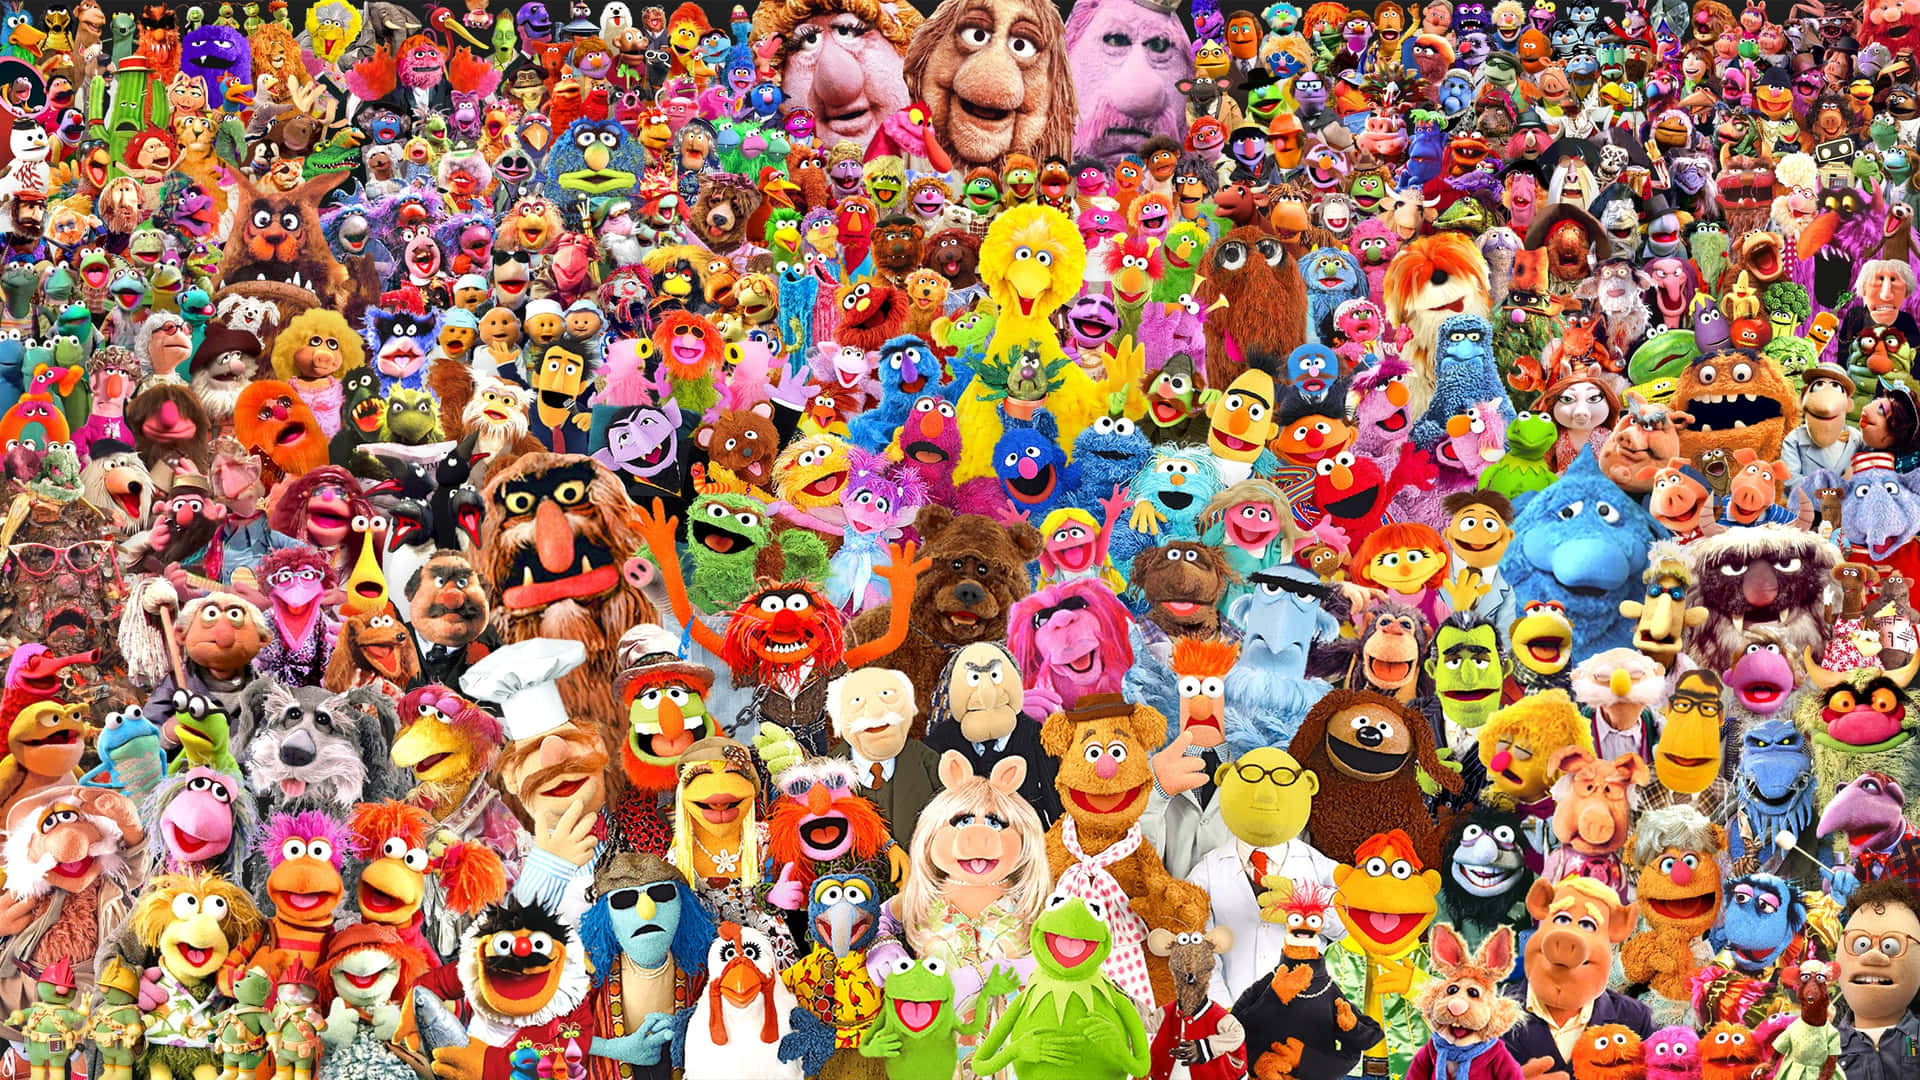 The Muppets Wallpaper